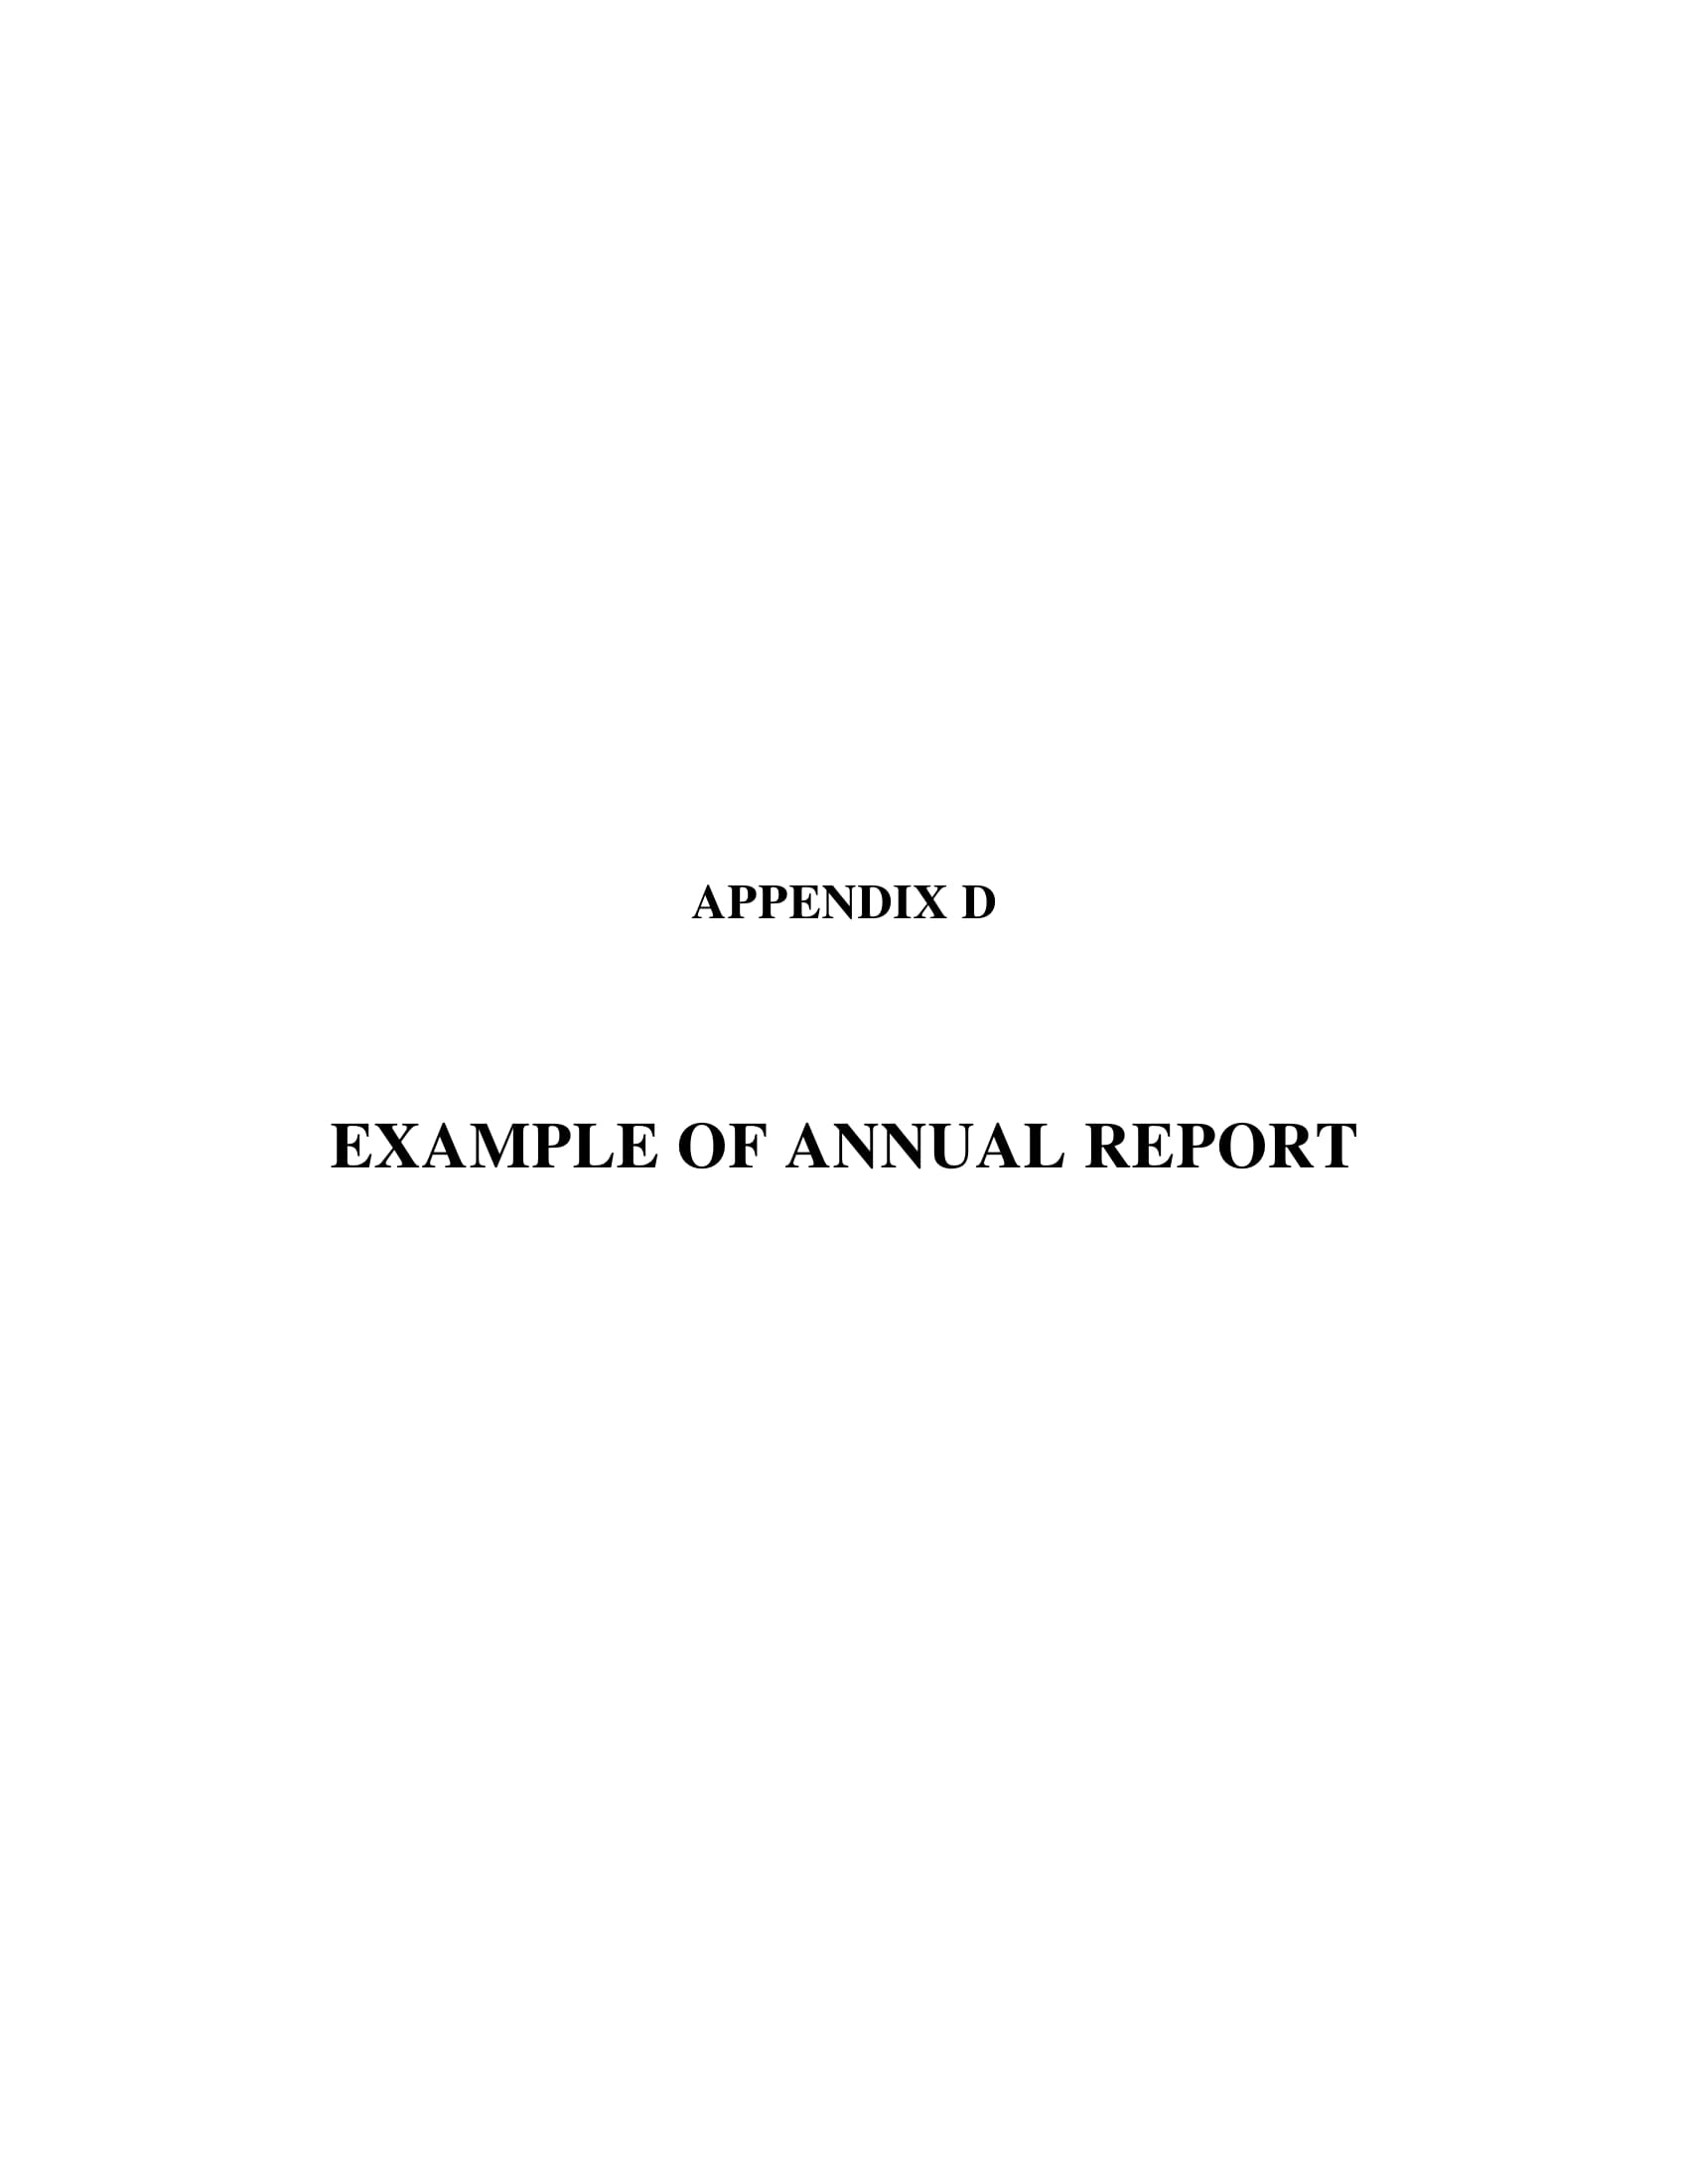 business annual report example 01